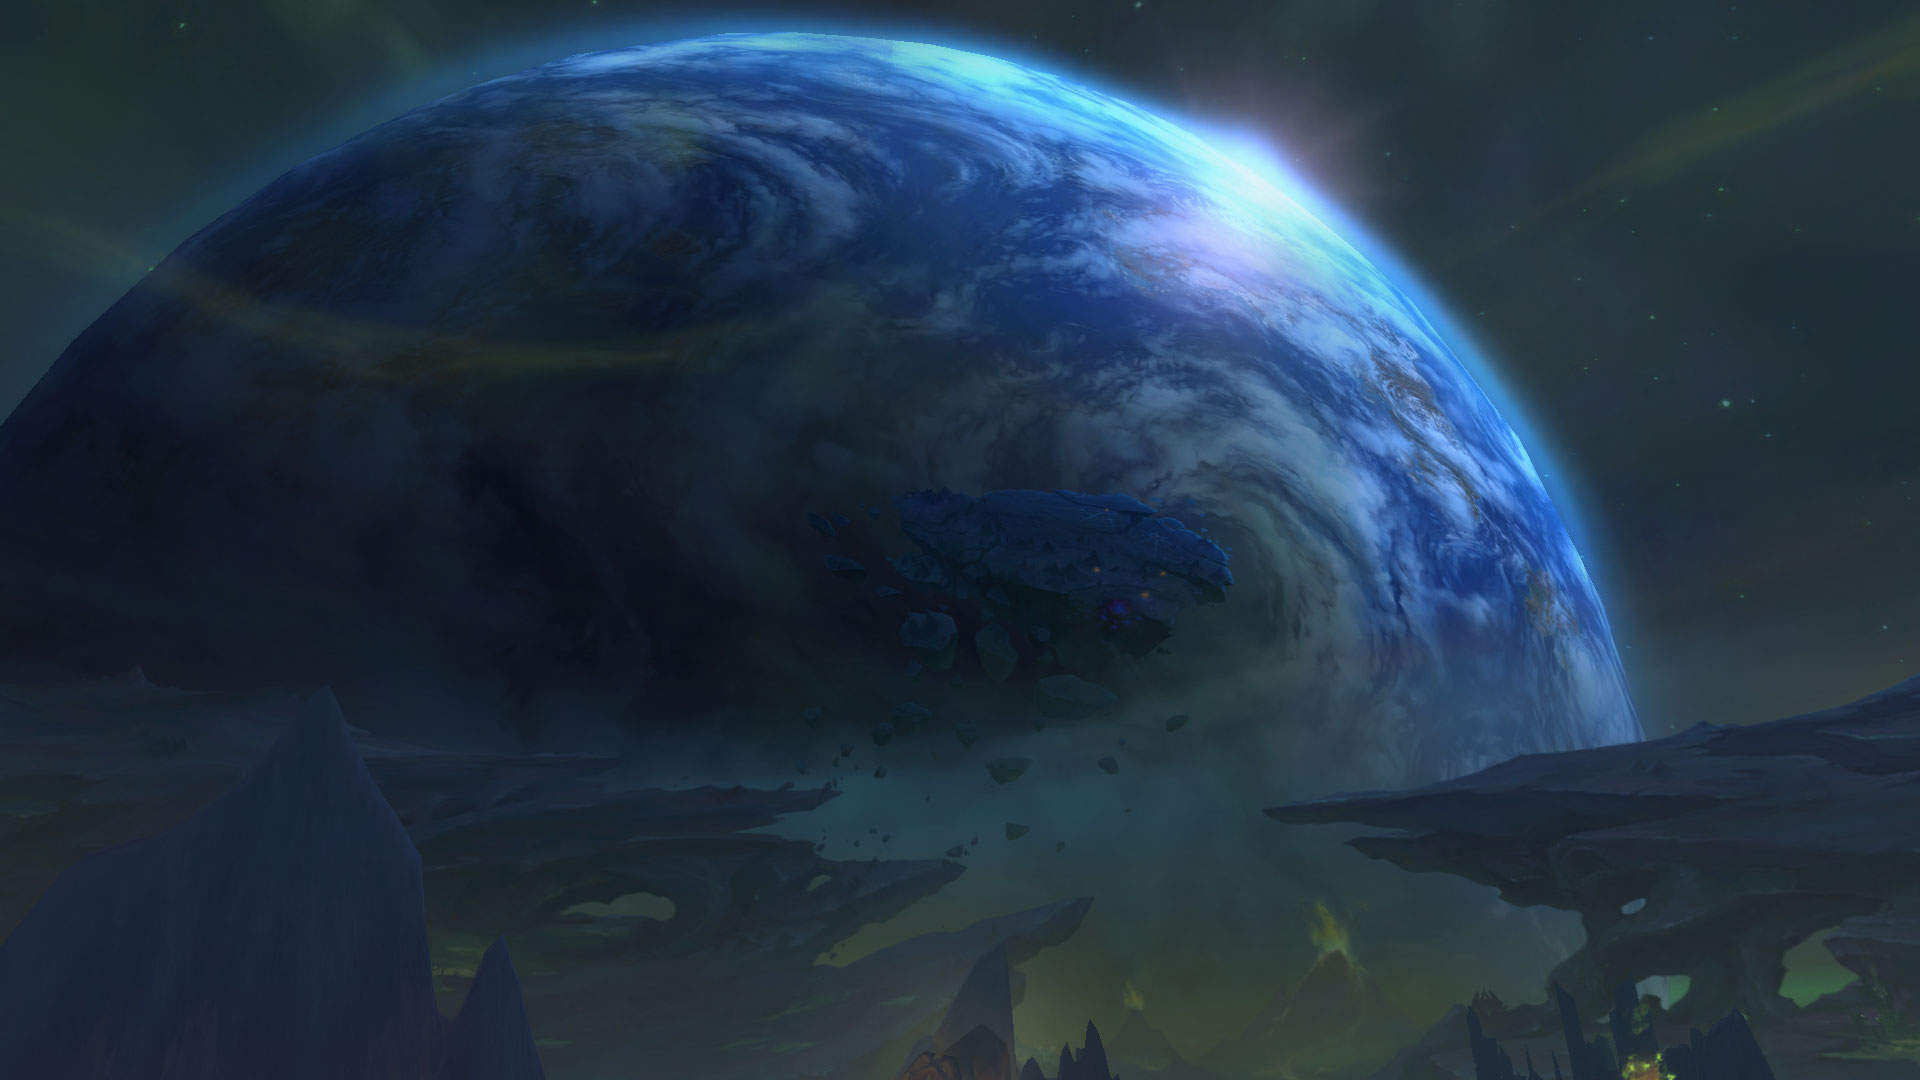 World of Warcraft: Legion, Argus and Azeroth in 7.3 Wallpaper